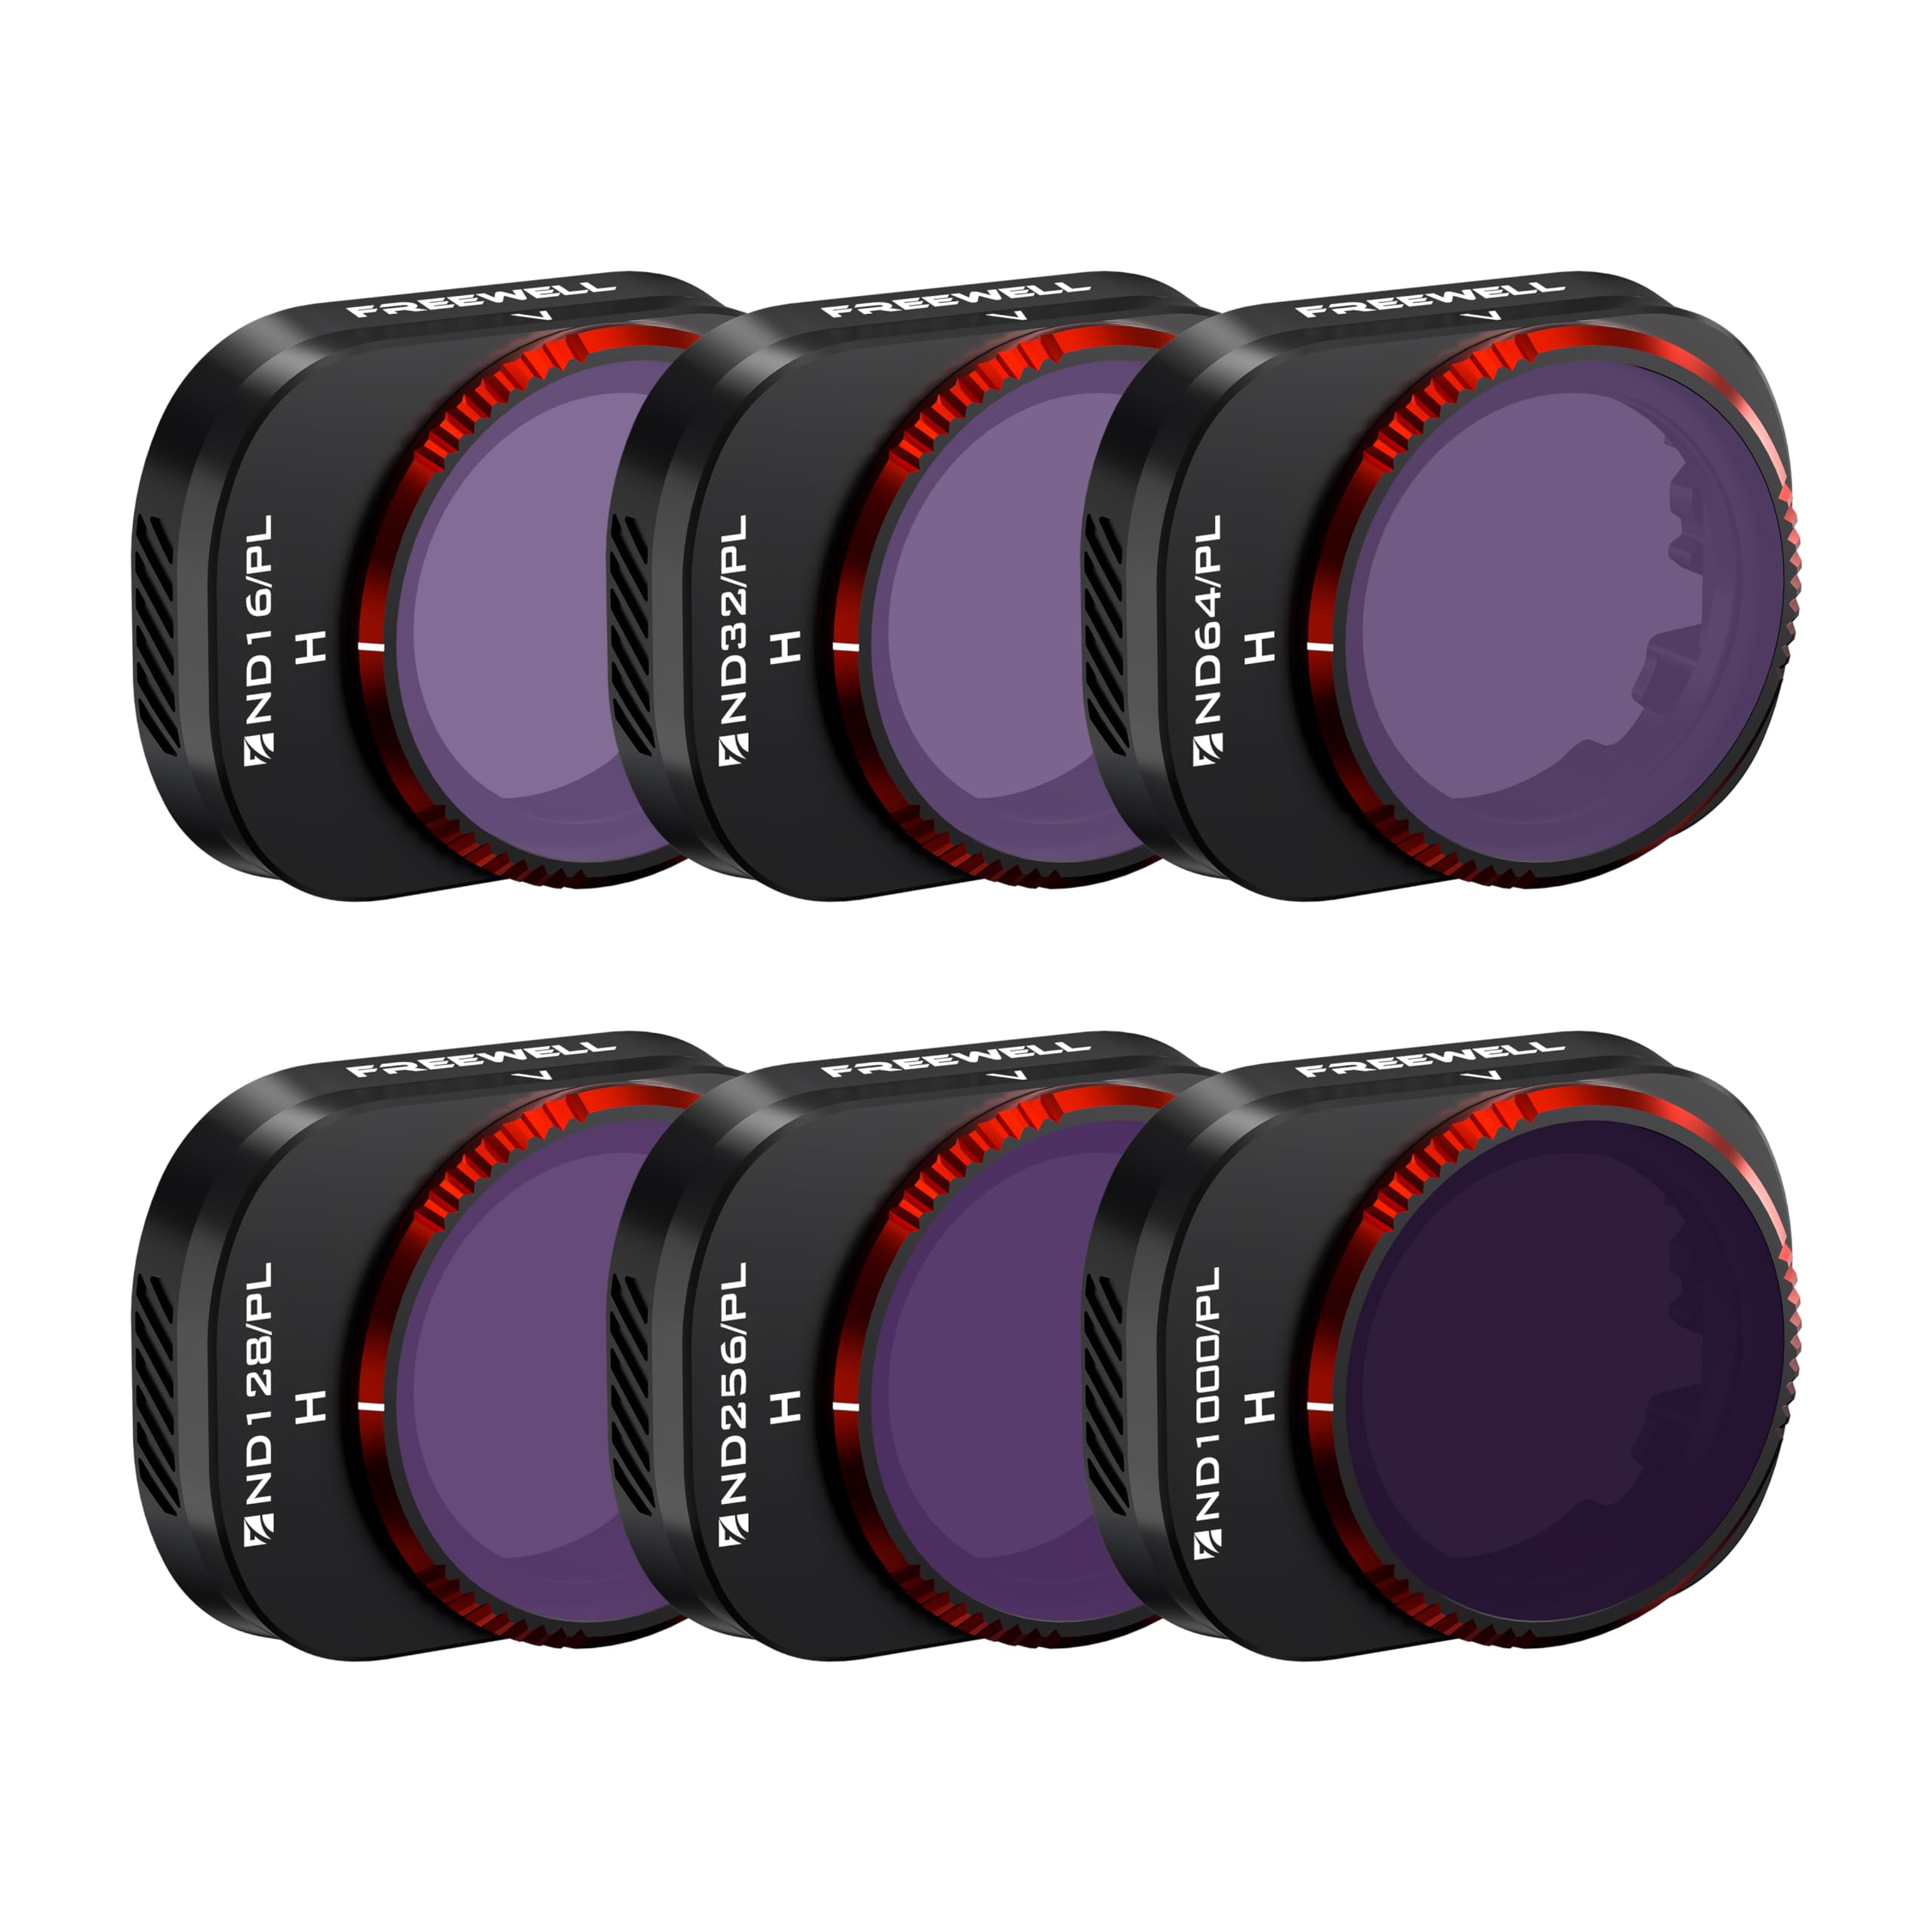 Freewell Bright Day-6Pack Hybrid ND16/PL, ND32/PL, ND64/PL, ND128/PL, ND256/PL, and ND1000/PL Compatible with Mini 4 Pro Vivid Color, Rich Contrast